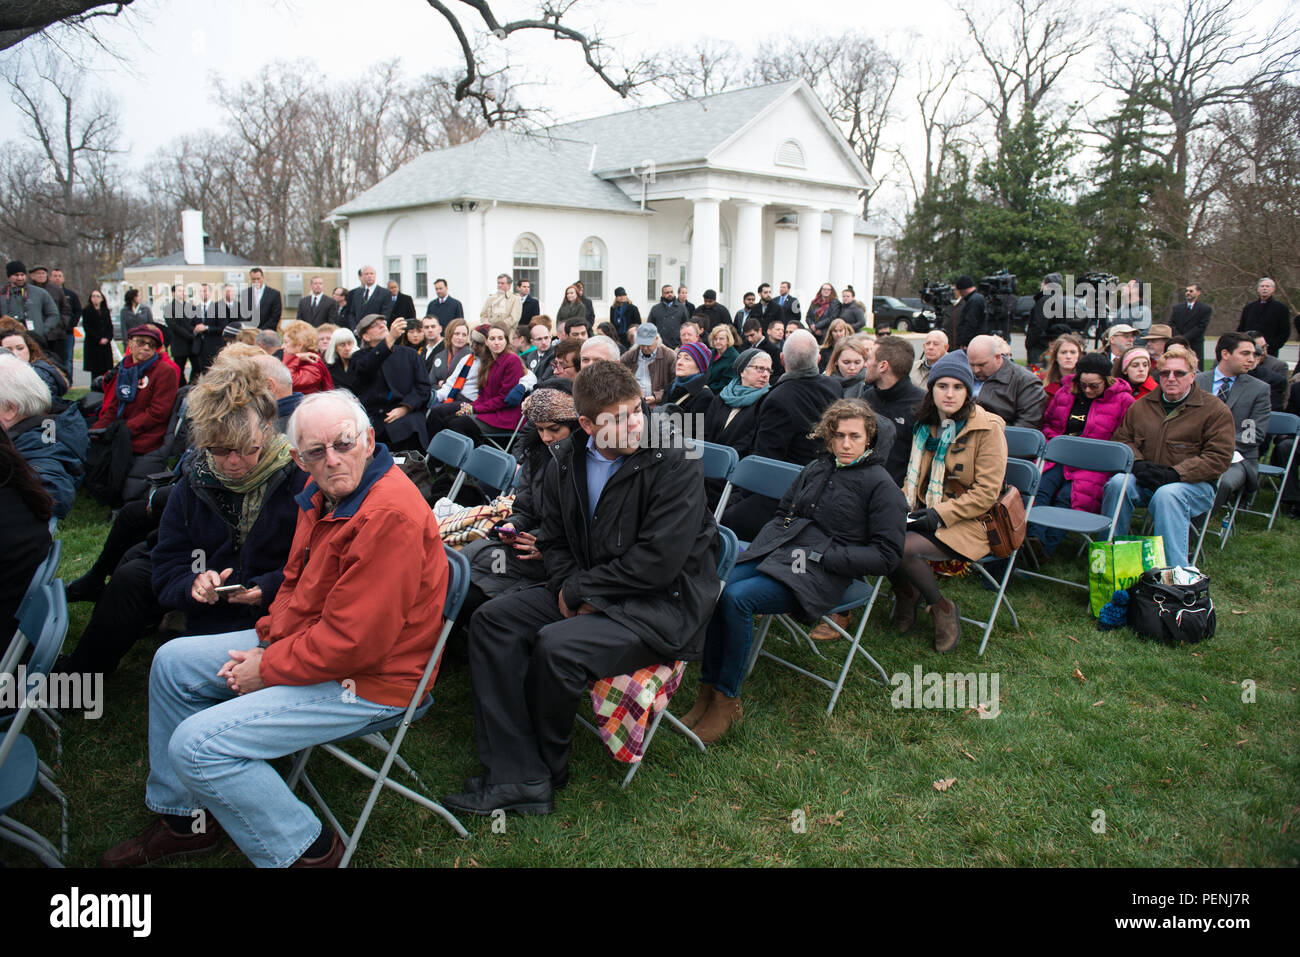 Attendees watch a bagpiper play during the Pan Am Flight 103 memorial ceremony in Arlington National Cemetery, Dec. 21, 2015, in Arlington, Va. A terrorist’s bomb destroyed the aircraft 27 years ago, in what became known as the “Lockerbie bombing,” killing 243 passengers, 16 crew members and 11 people on the ground. (U.S. Army photo by Rachel Larue/Arlington National Cemetery/released) Stock Photo